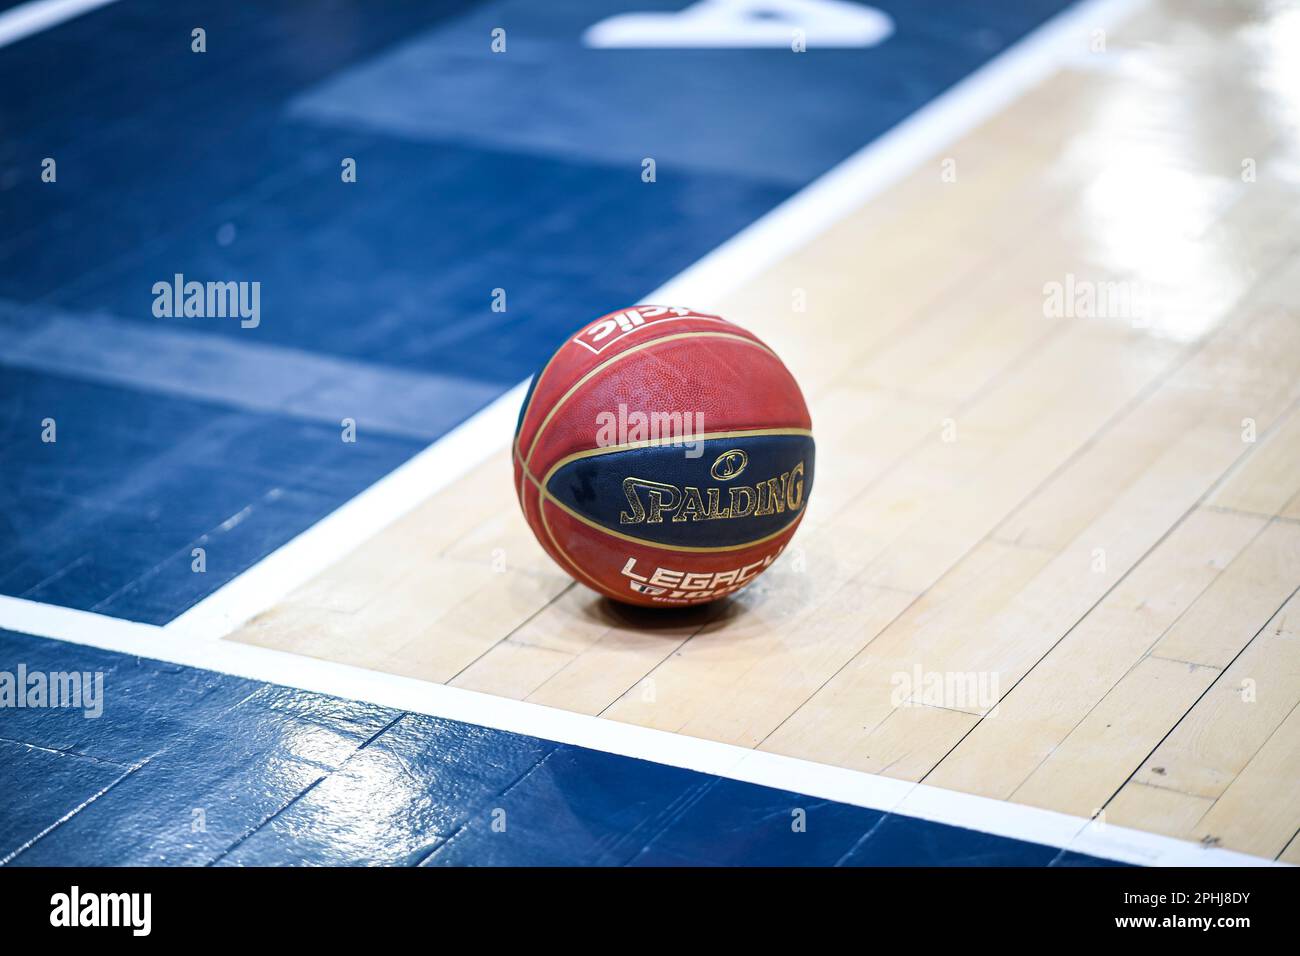 Paris, France. 28th Mar, 2023. Spalding ball illustration during the French  championship, Betclic elite basketball match between Le Mans Sarthe Basket ( MSB) and Metropolitans 92 (Mets or Boulogne-Levallois) on March 28, 2023